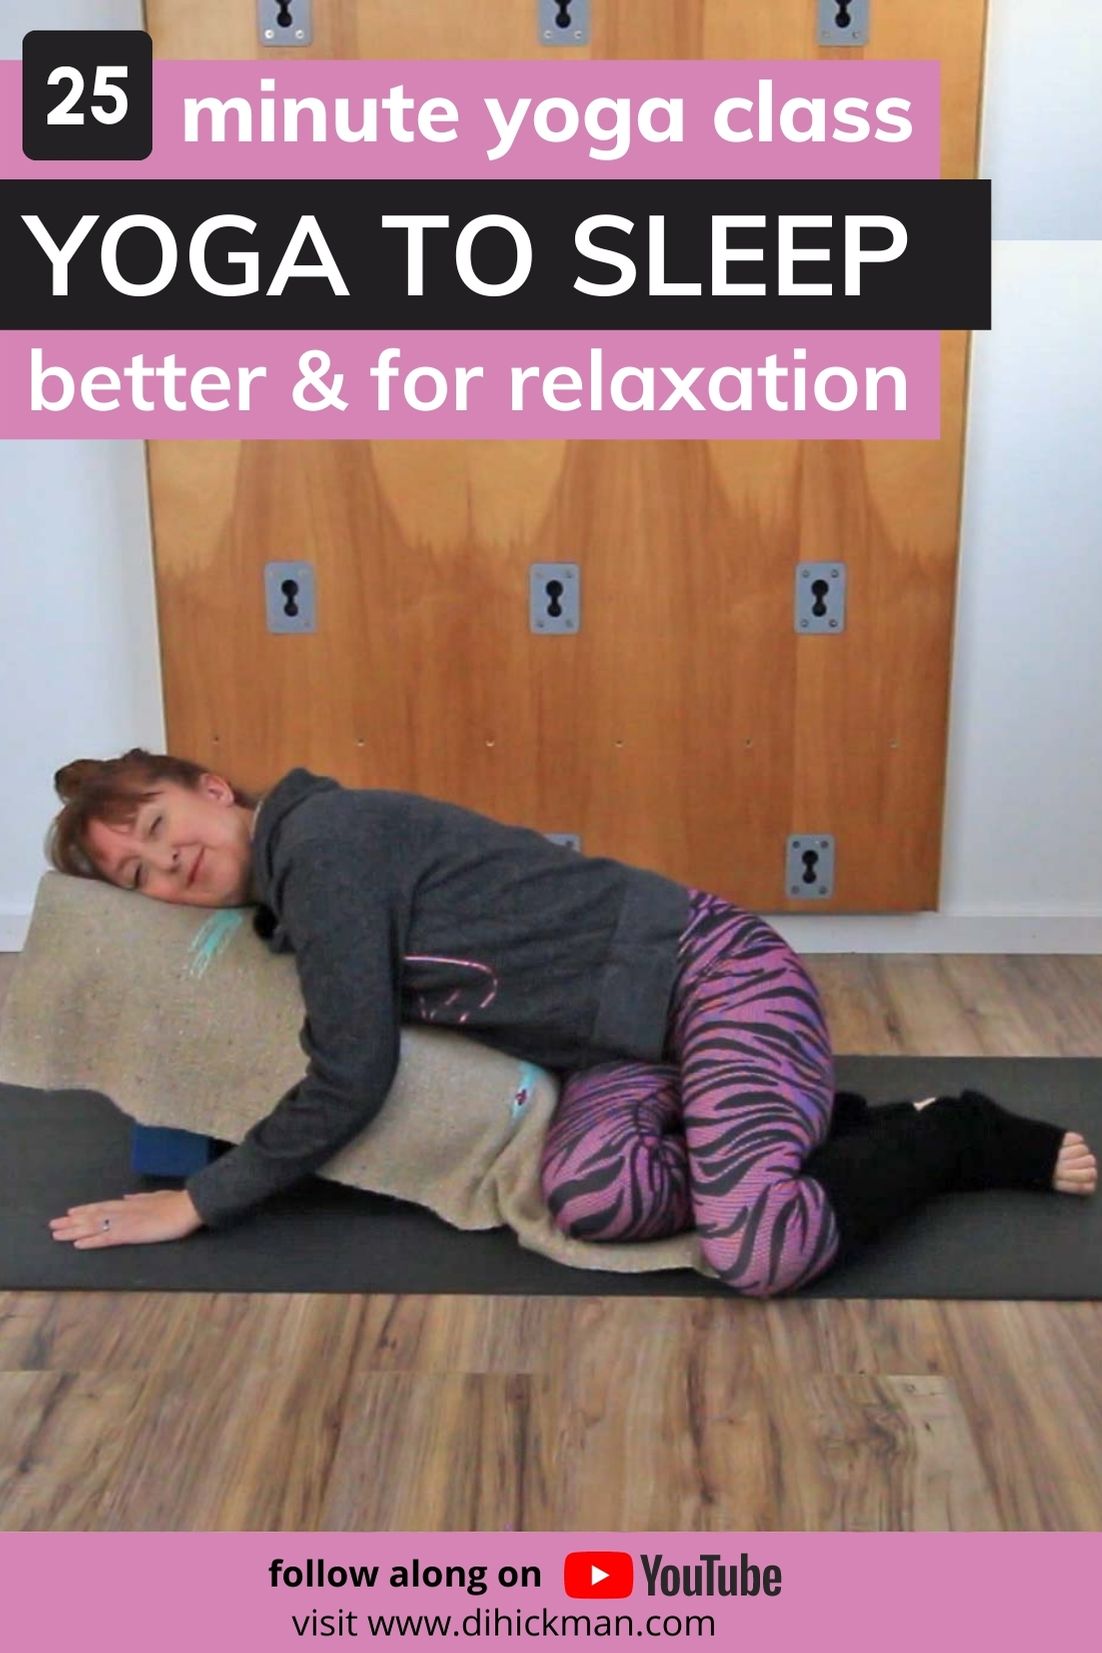 25 minute yoga class, Yoga to sleep better & for relaxation